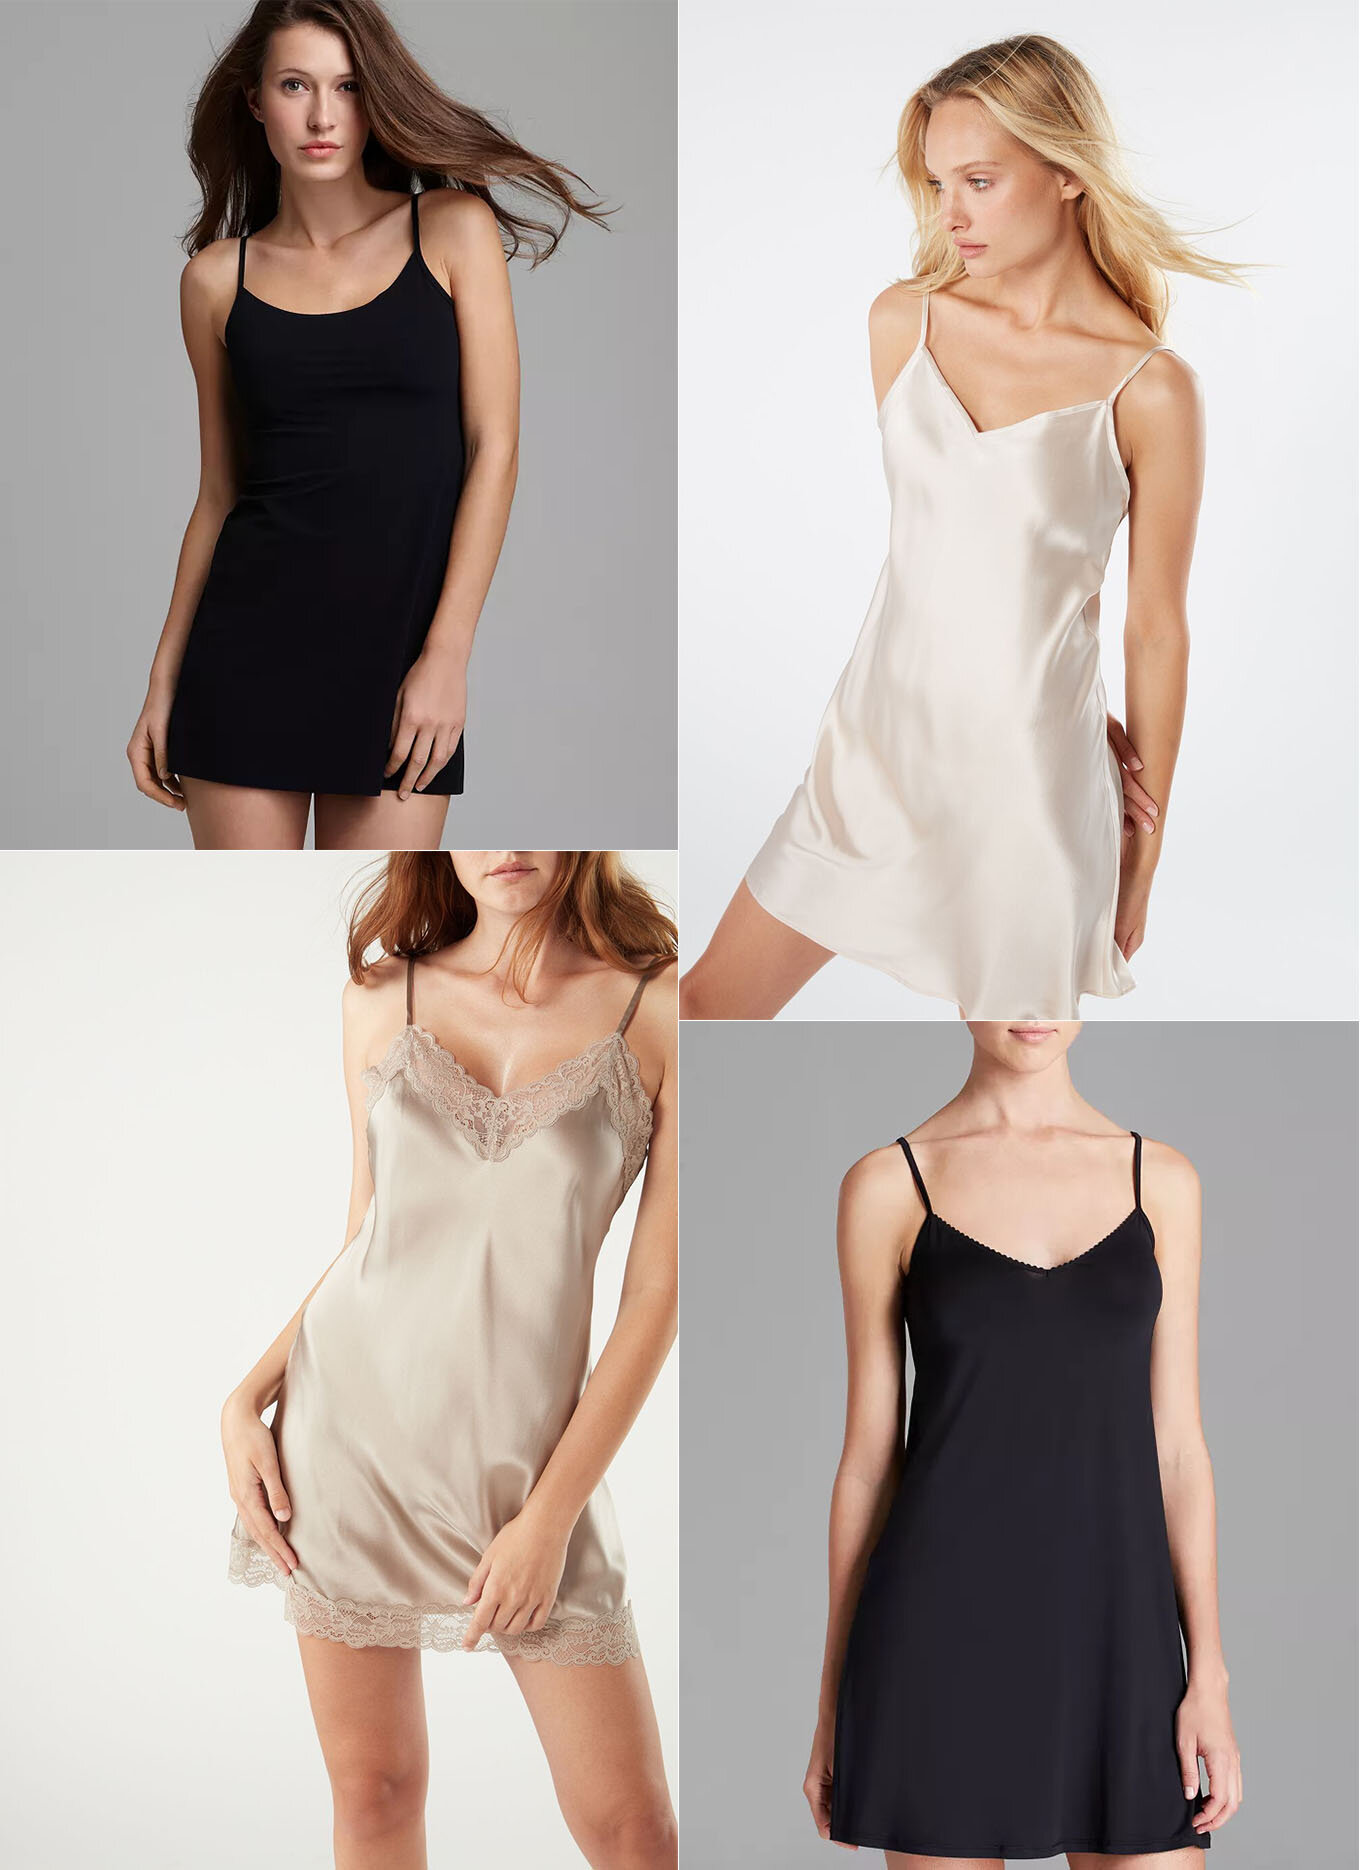 A full slip is a wardrobe must-have! It is a perfect layer under a sheer dress, a layer of warmth in winter months, and a dress saver in hotter weather.